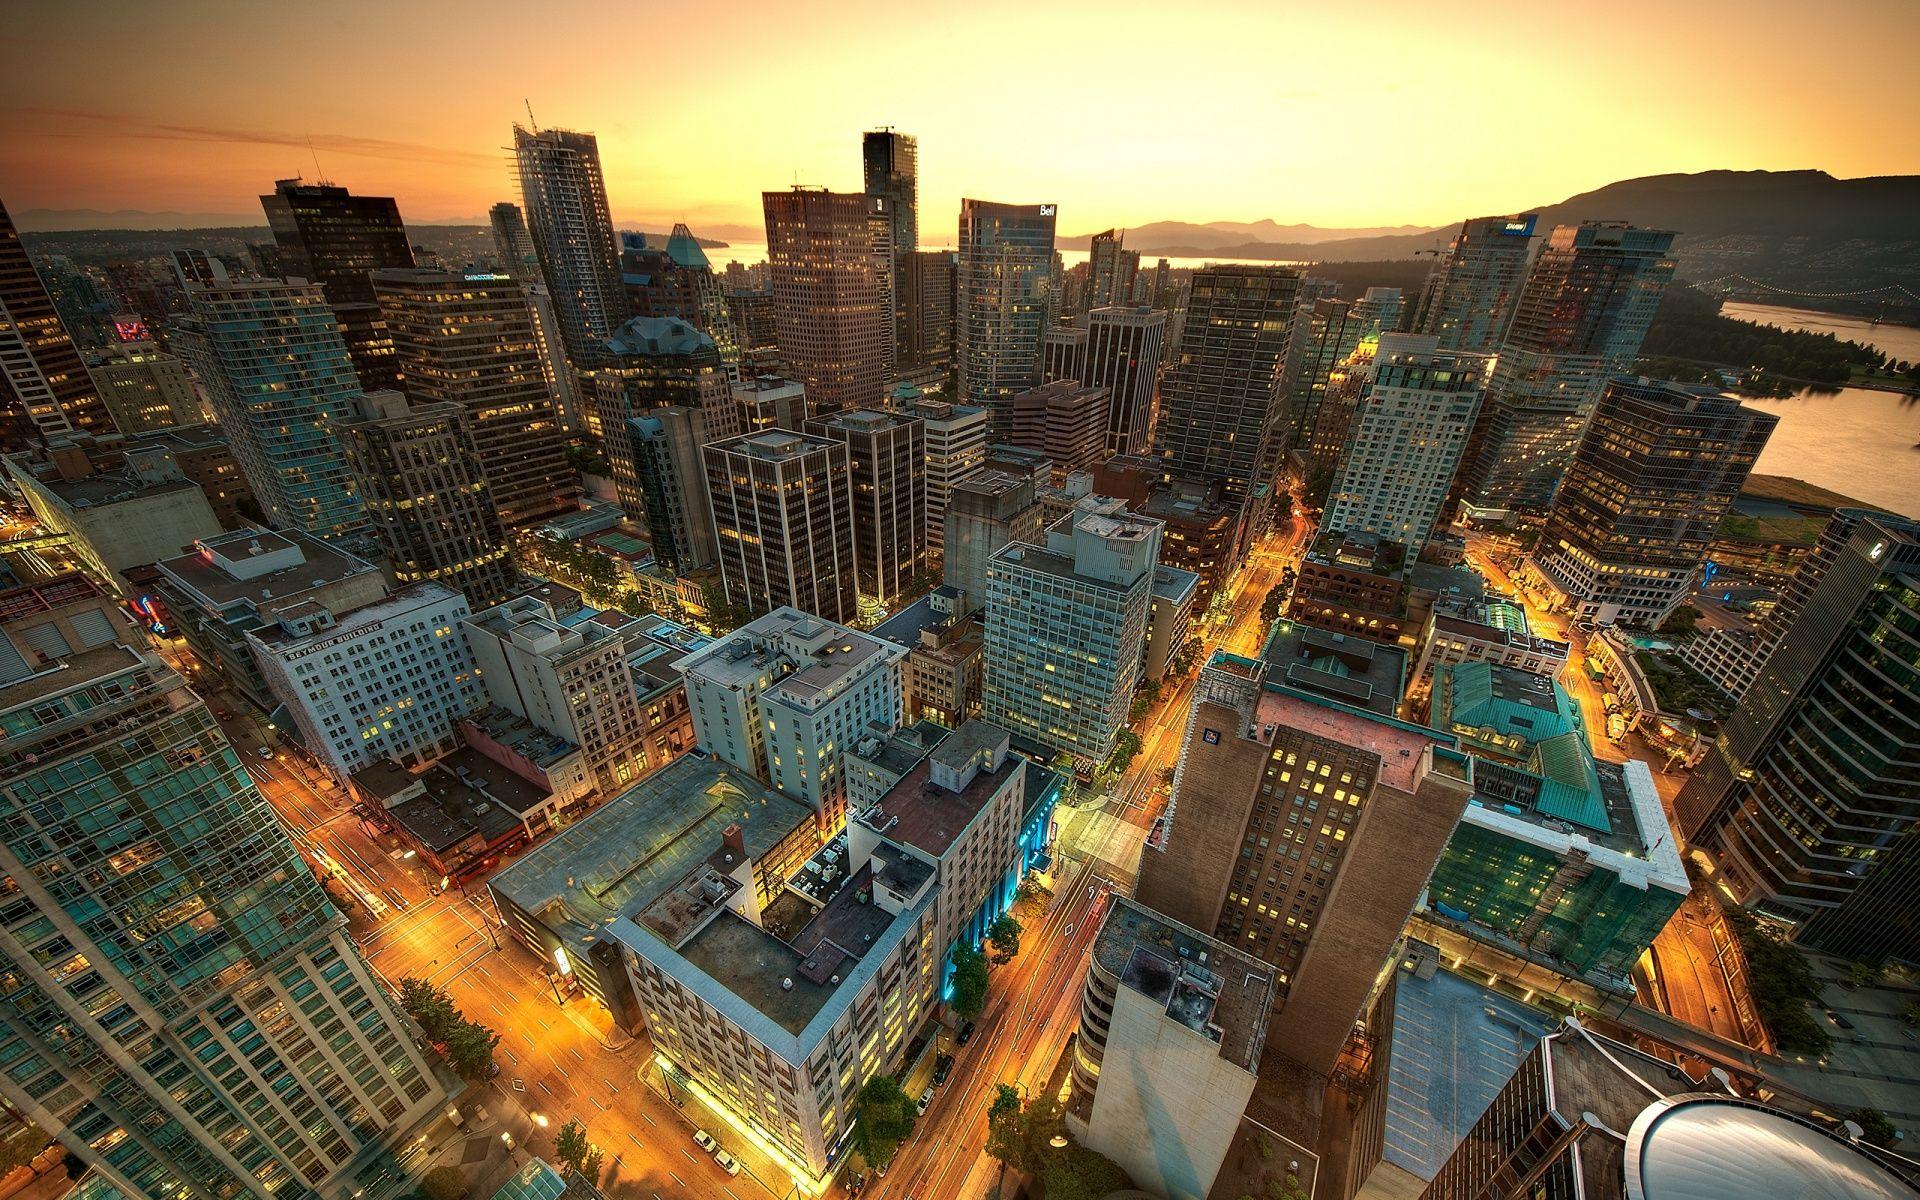 Vancouver Sunset Canada Wallpaper in jpg format for free download